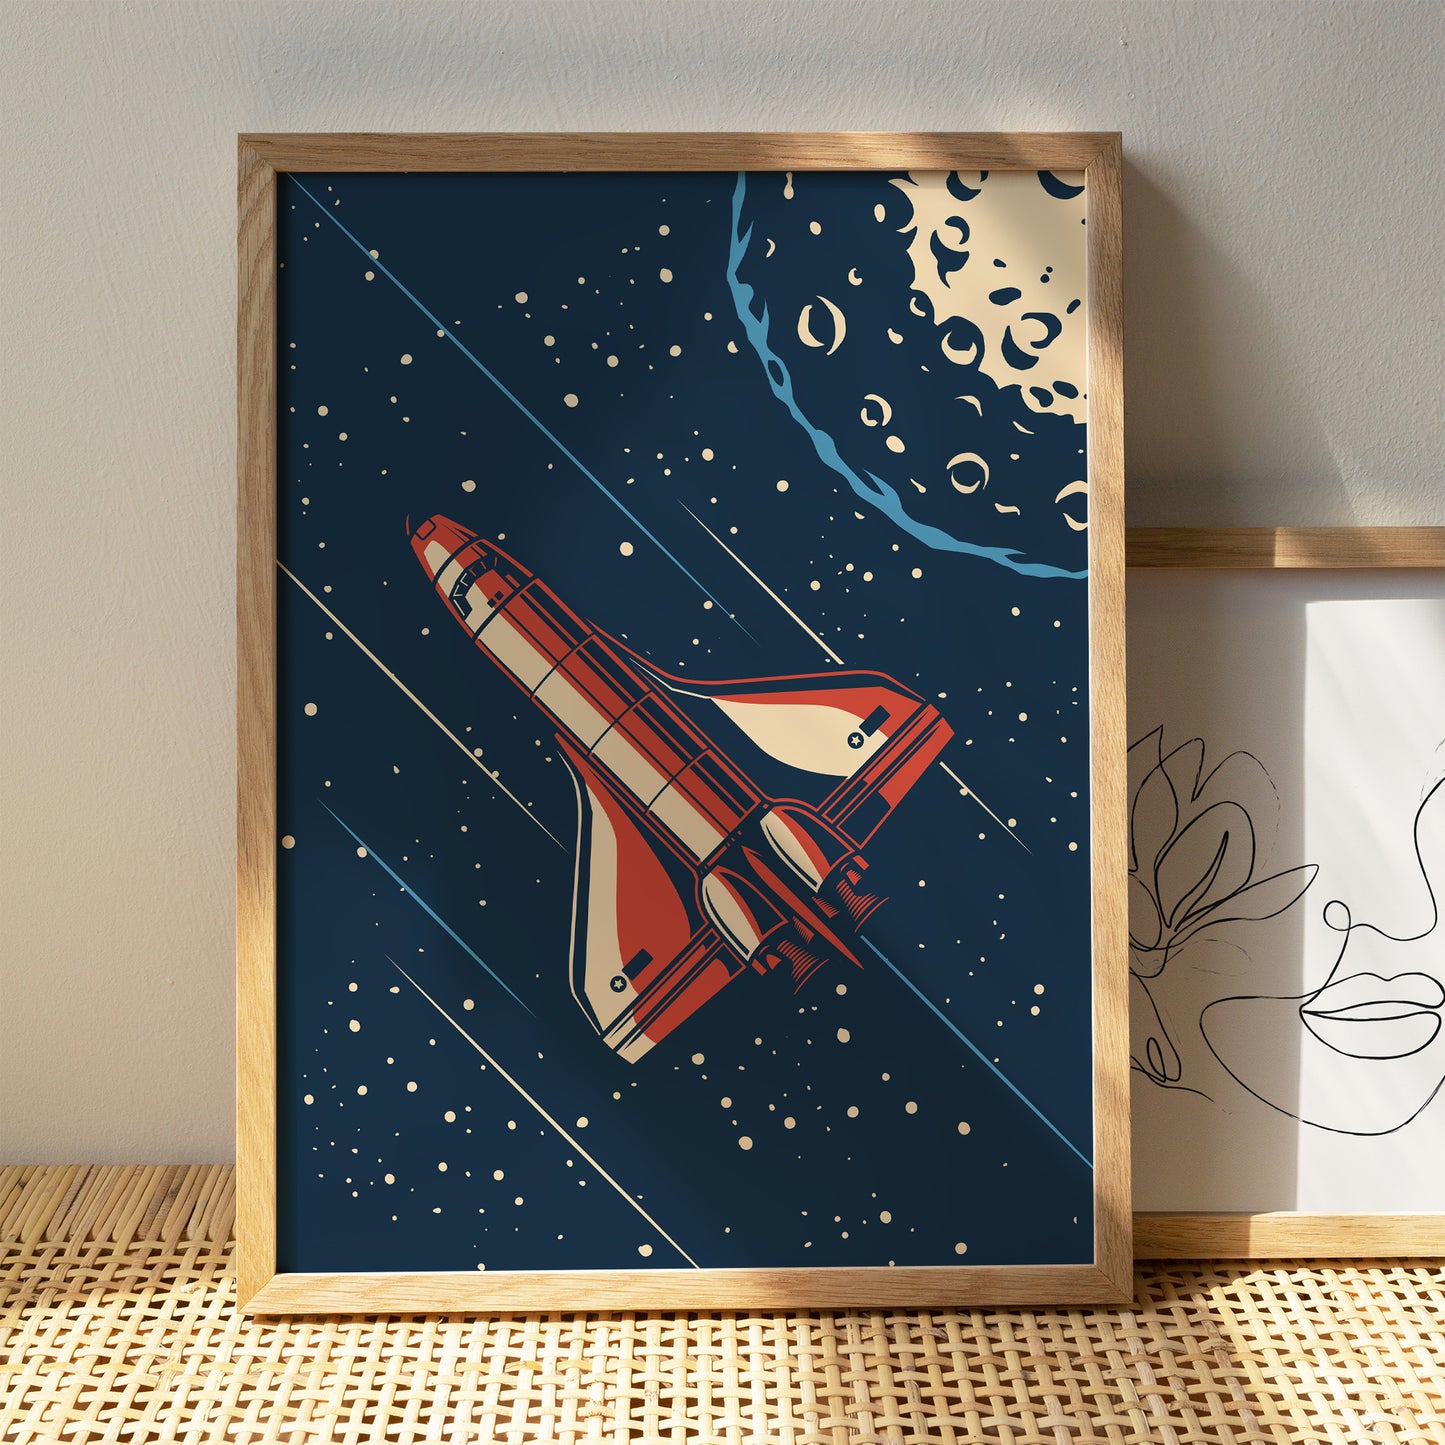 Space Shuttle Illustration - Retro Space Travel Poster